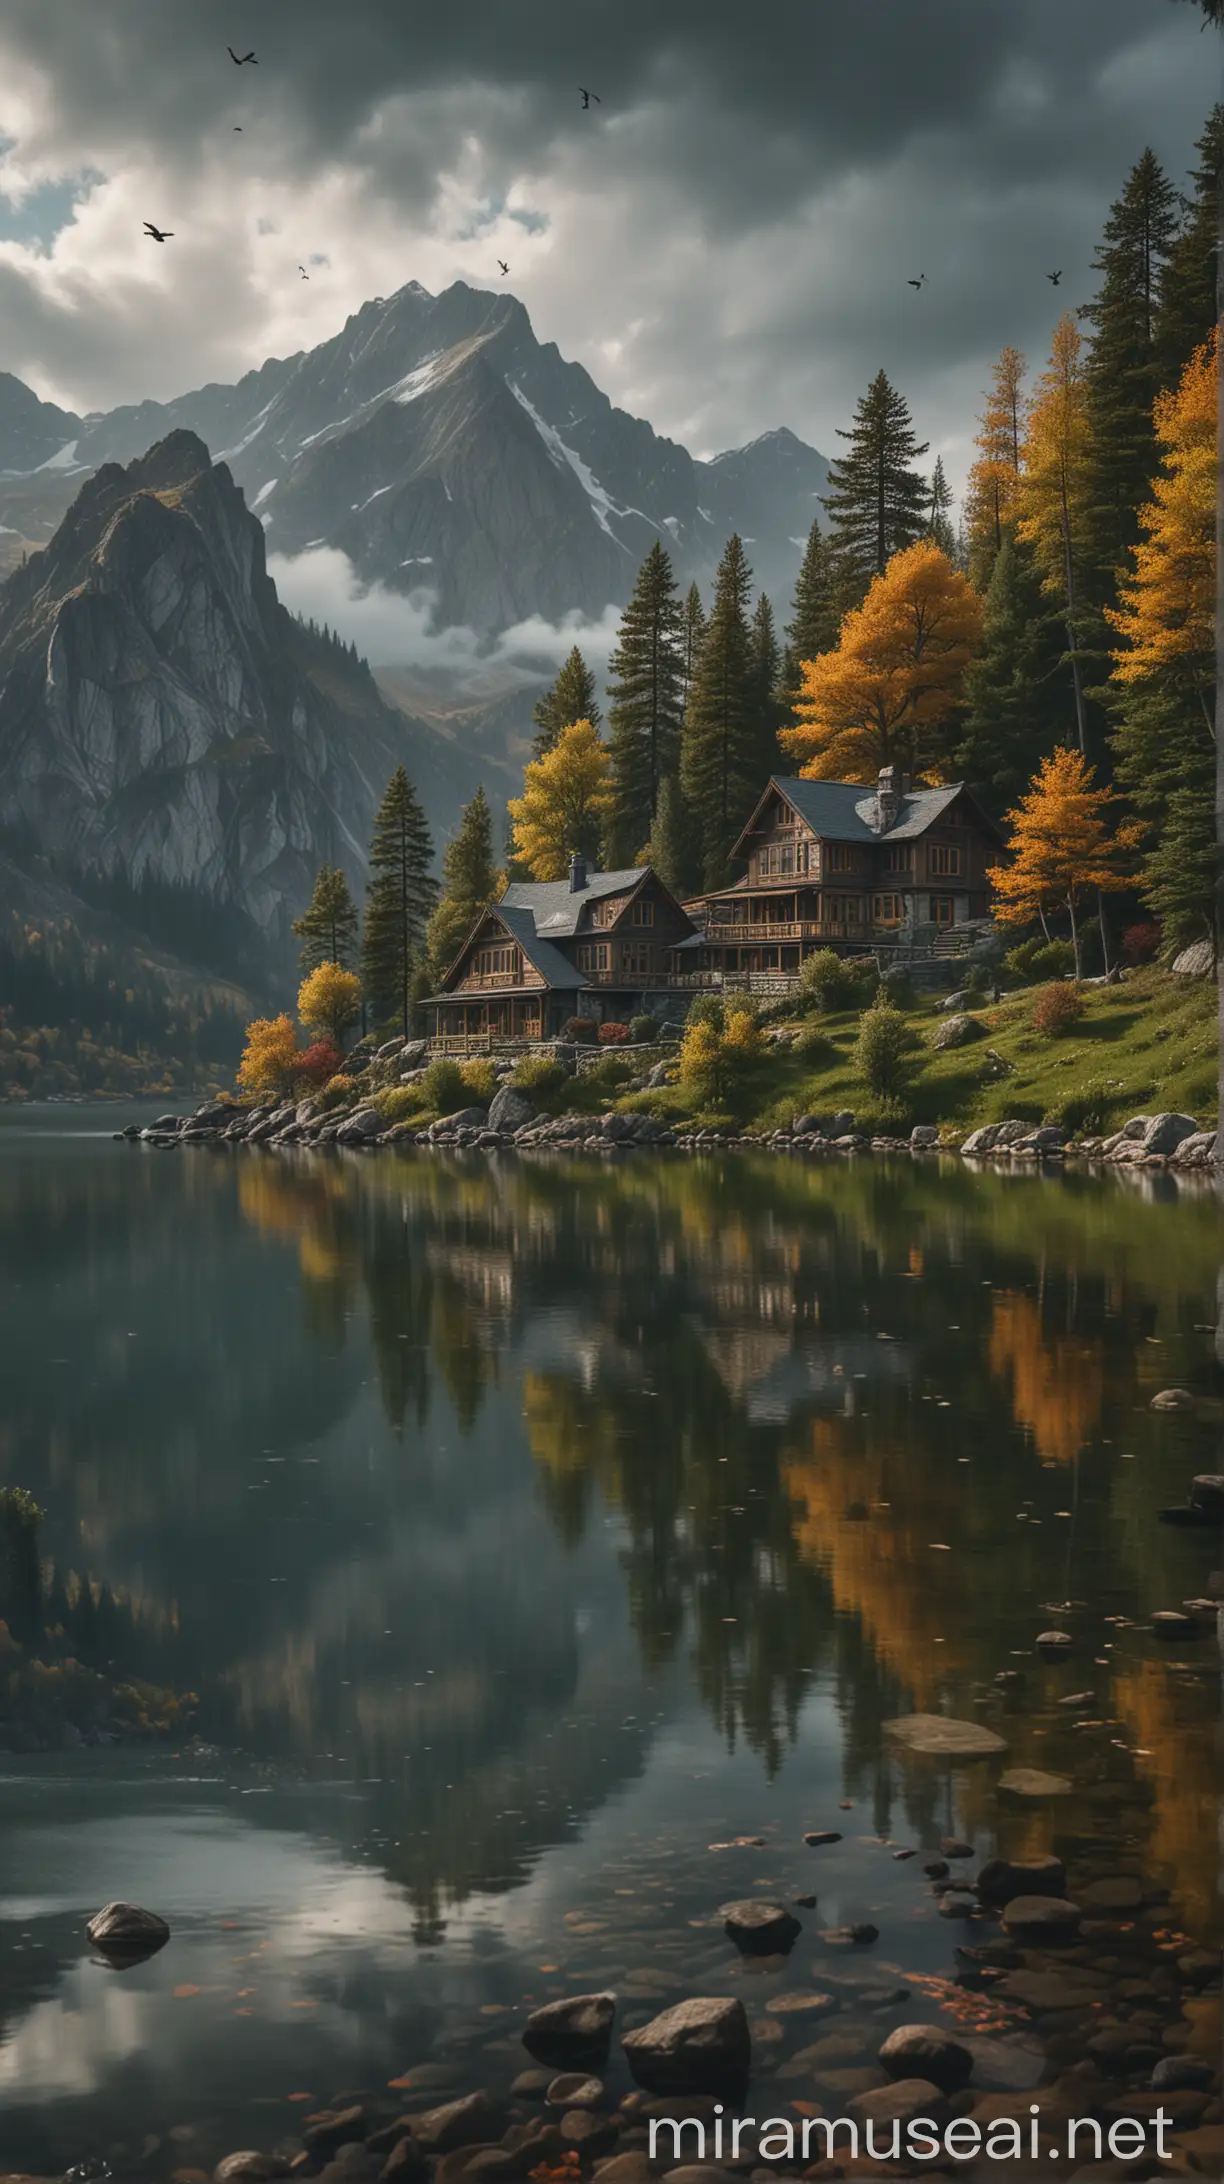 Tranquil Mountain Landscape with Reflective Waters and Quaint House